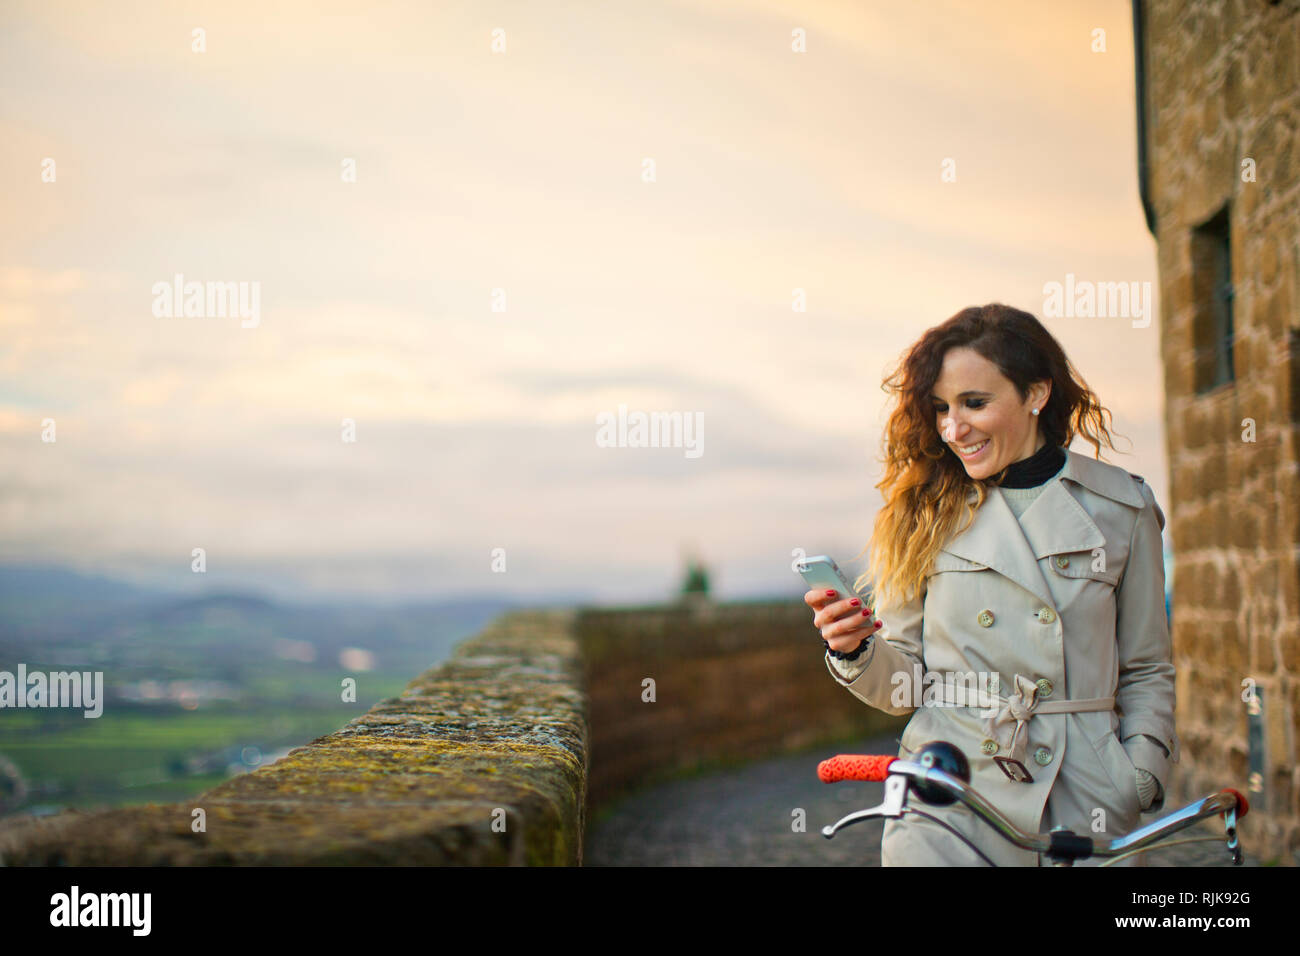 Young woman on bike using her phone. Stock Photo